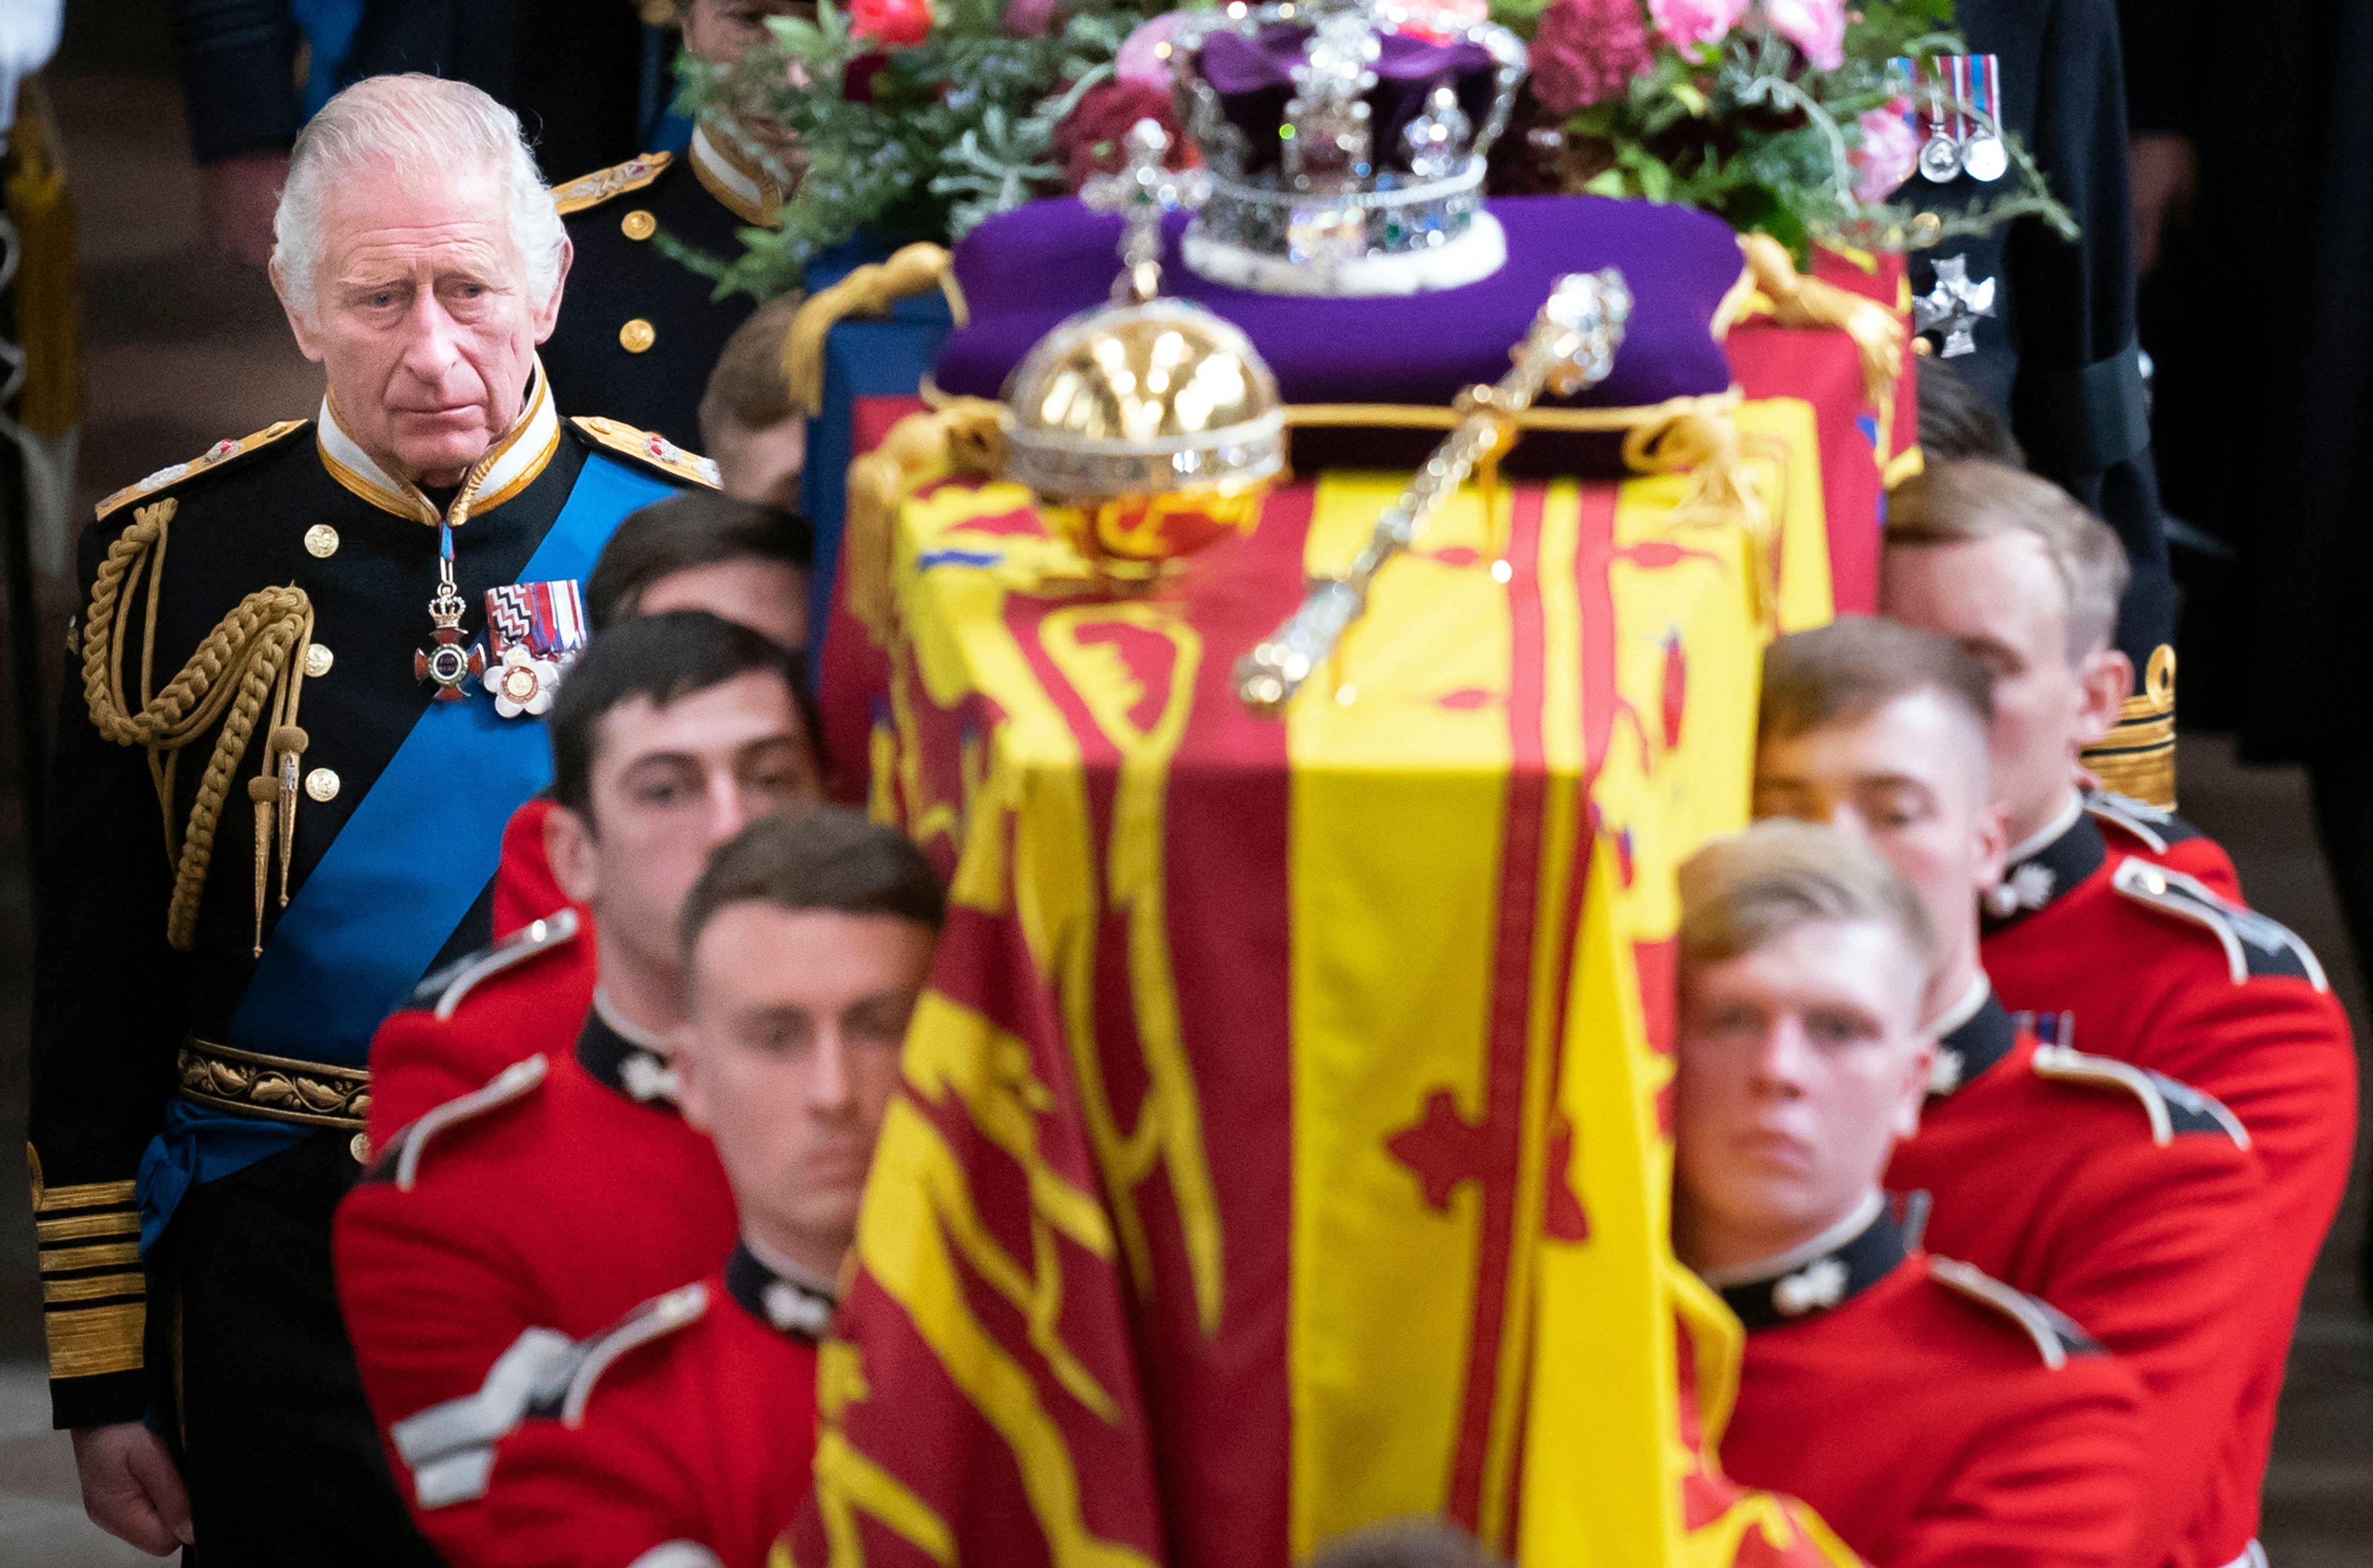 King Charles III and members of the royal family follow the coffin of Queen Elizabeth II, draped in the Royal Standard with the Imperial State Crown and the Sovereign's orb and sceptre, as it is carried out of Westminster Abbey after her State Funeral on September 19, 2022. (Photo by Danny Lawson / POOL / AFP) (Photo by DANNY LAWSON/POOL/AFP via Getty Images)